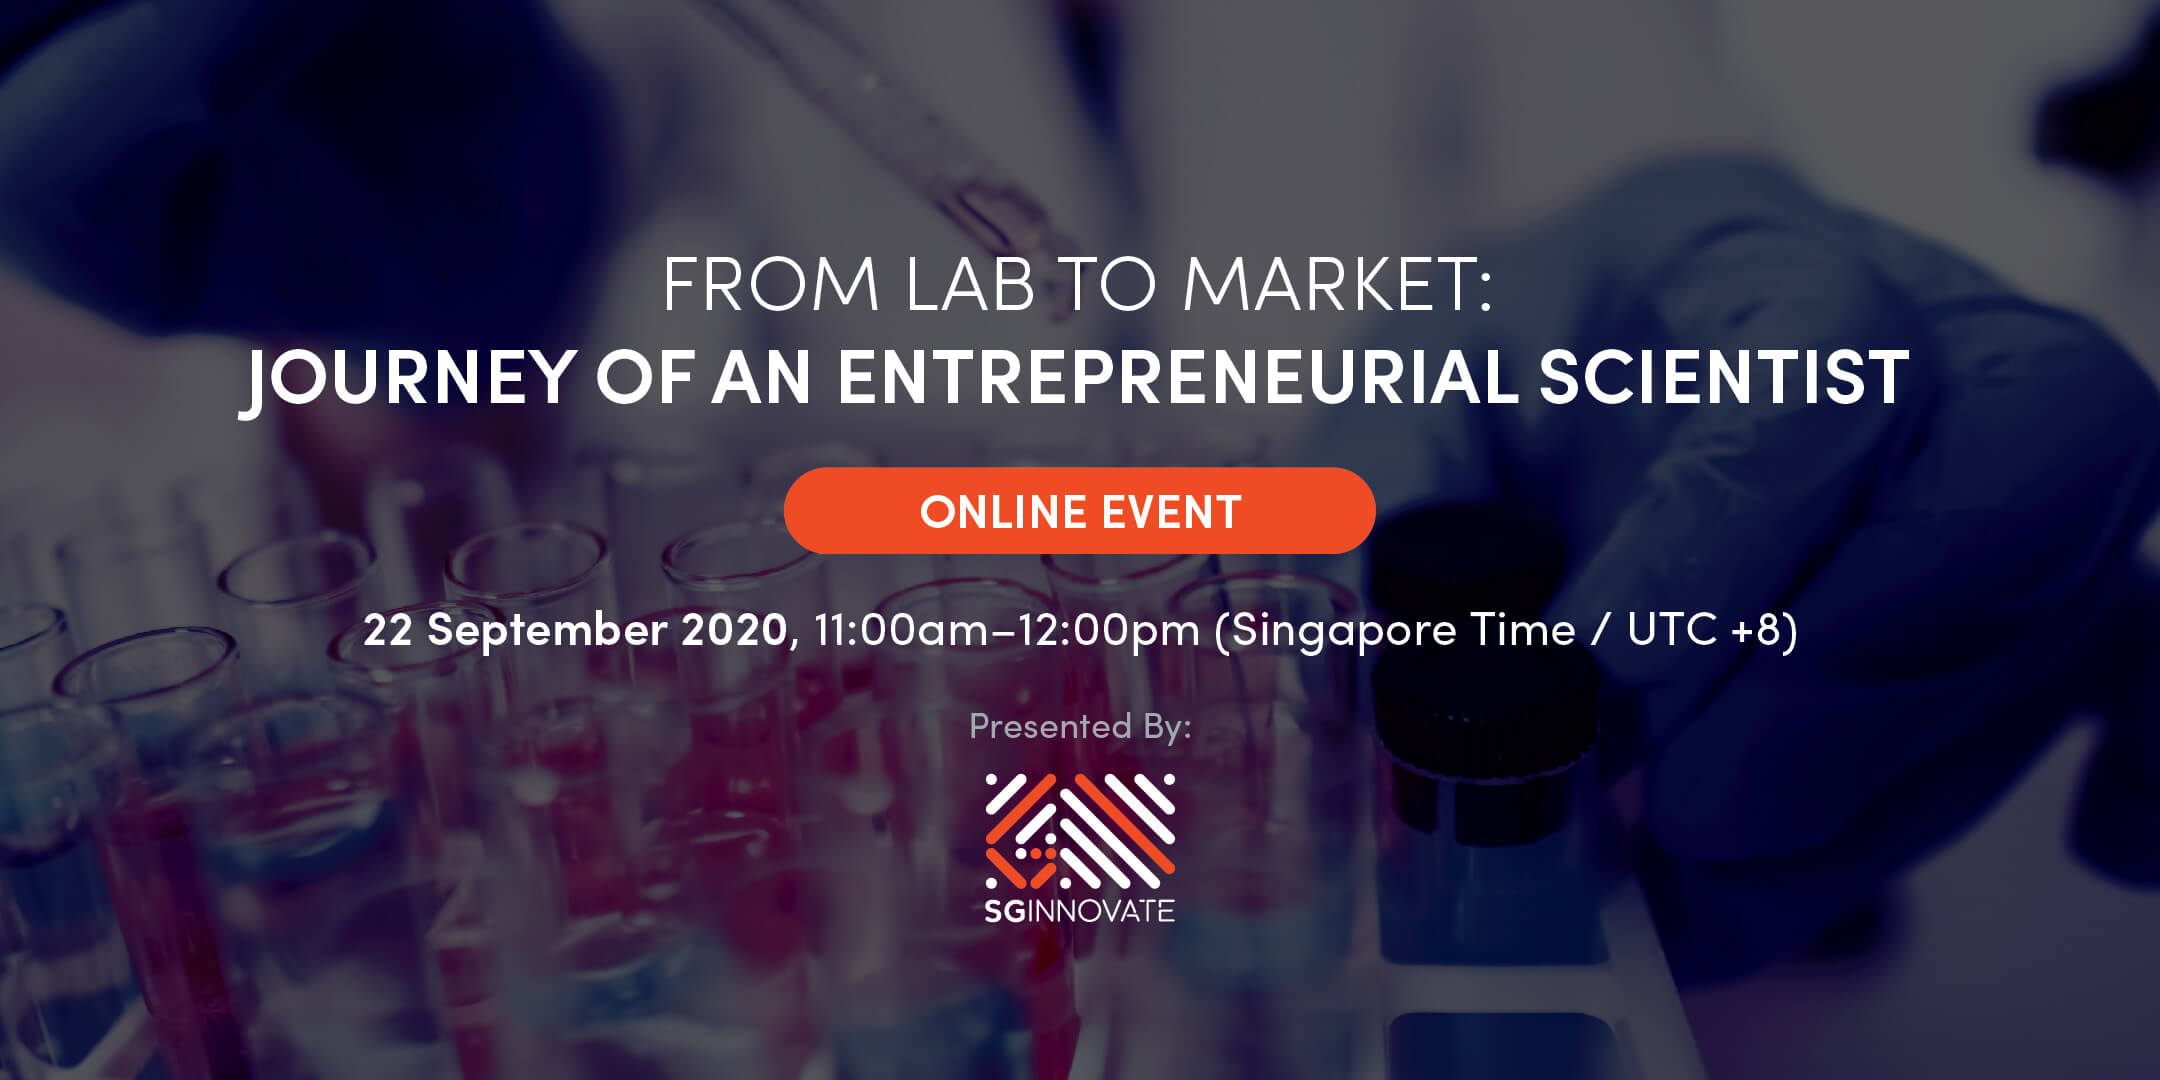 From Lab to Market: Journey of an Entrepreneurial Scientist